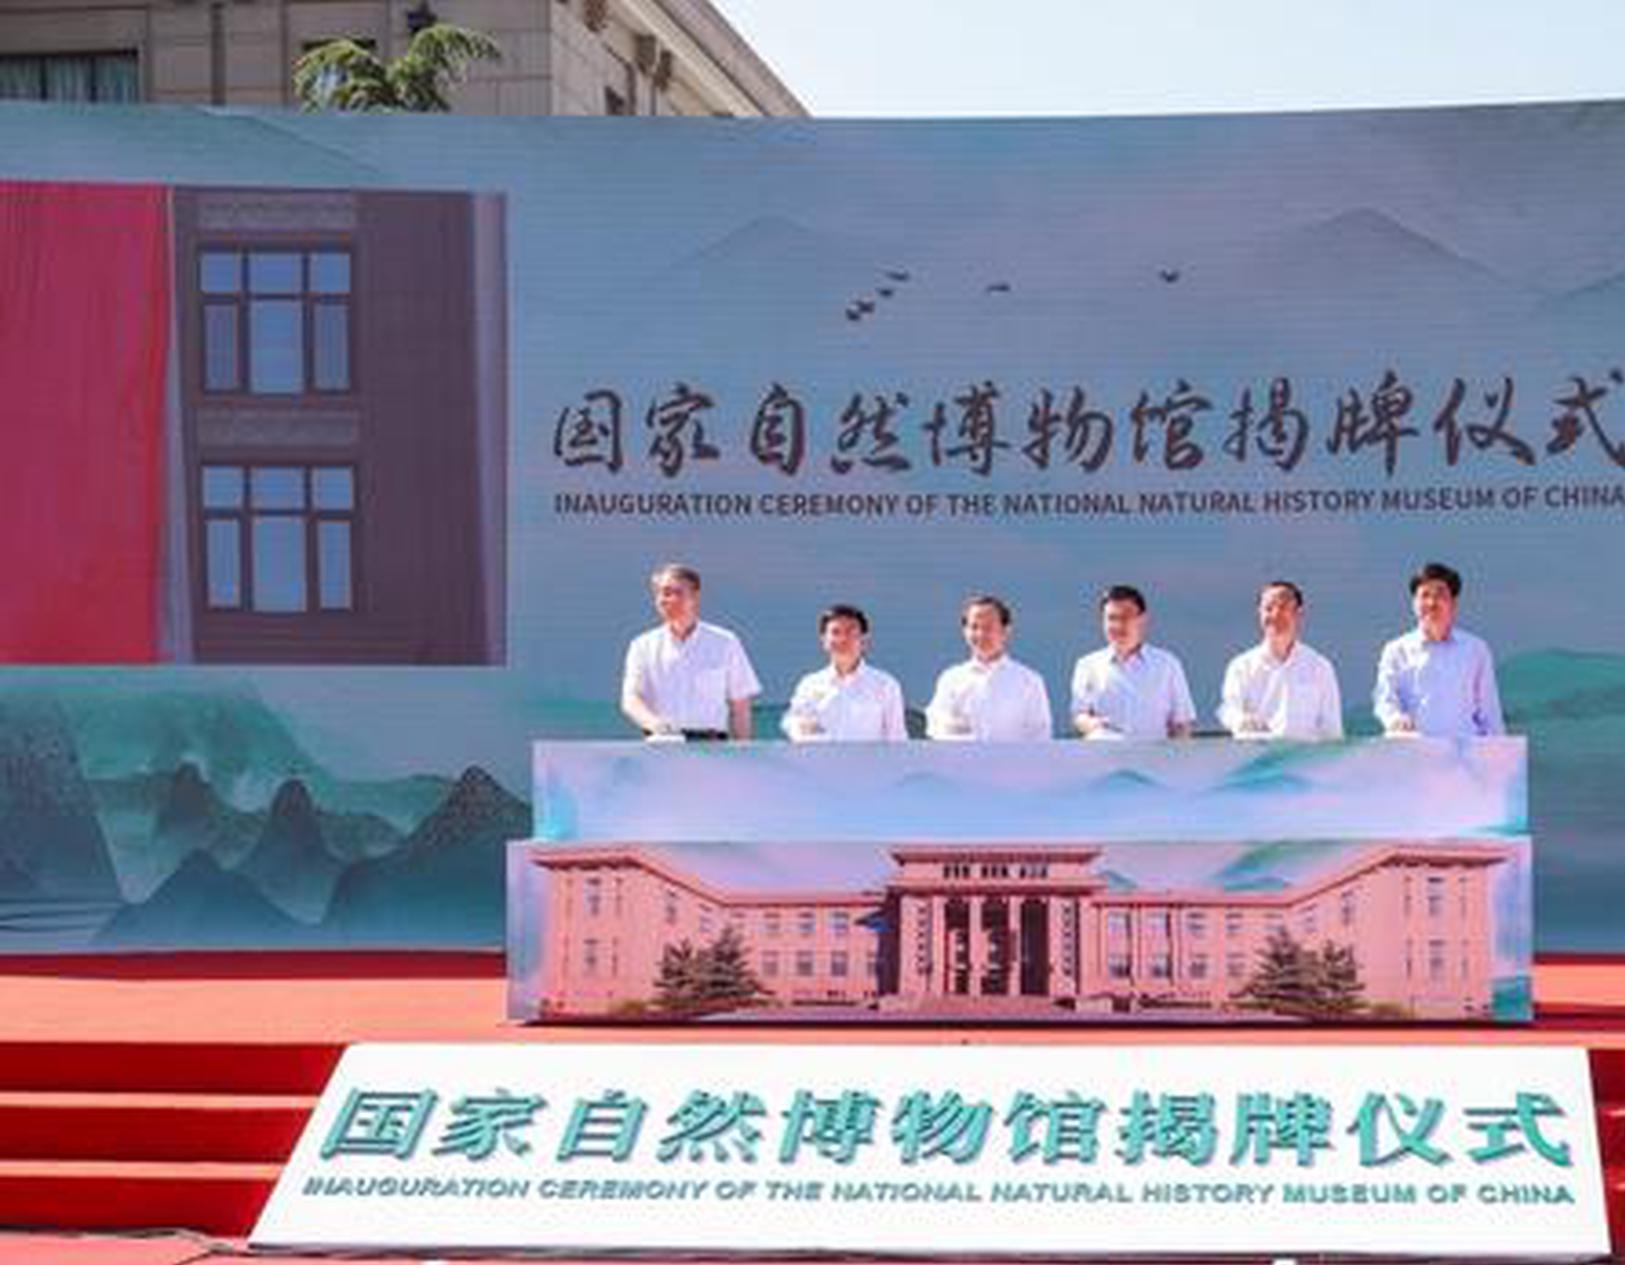 National History Museum of China unveiled in Beijing